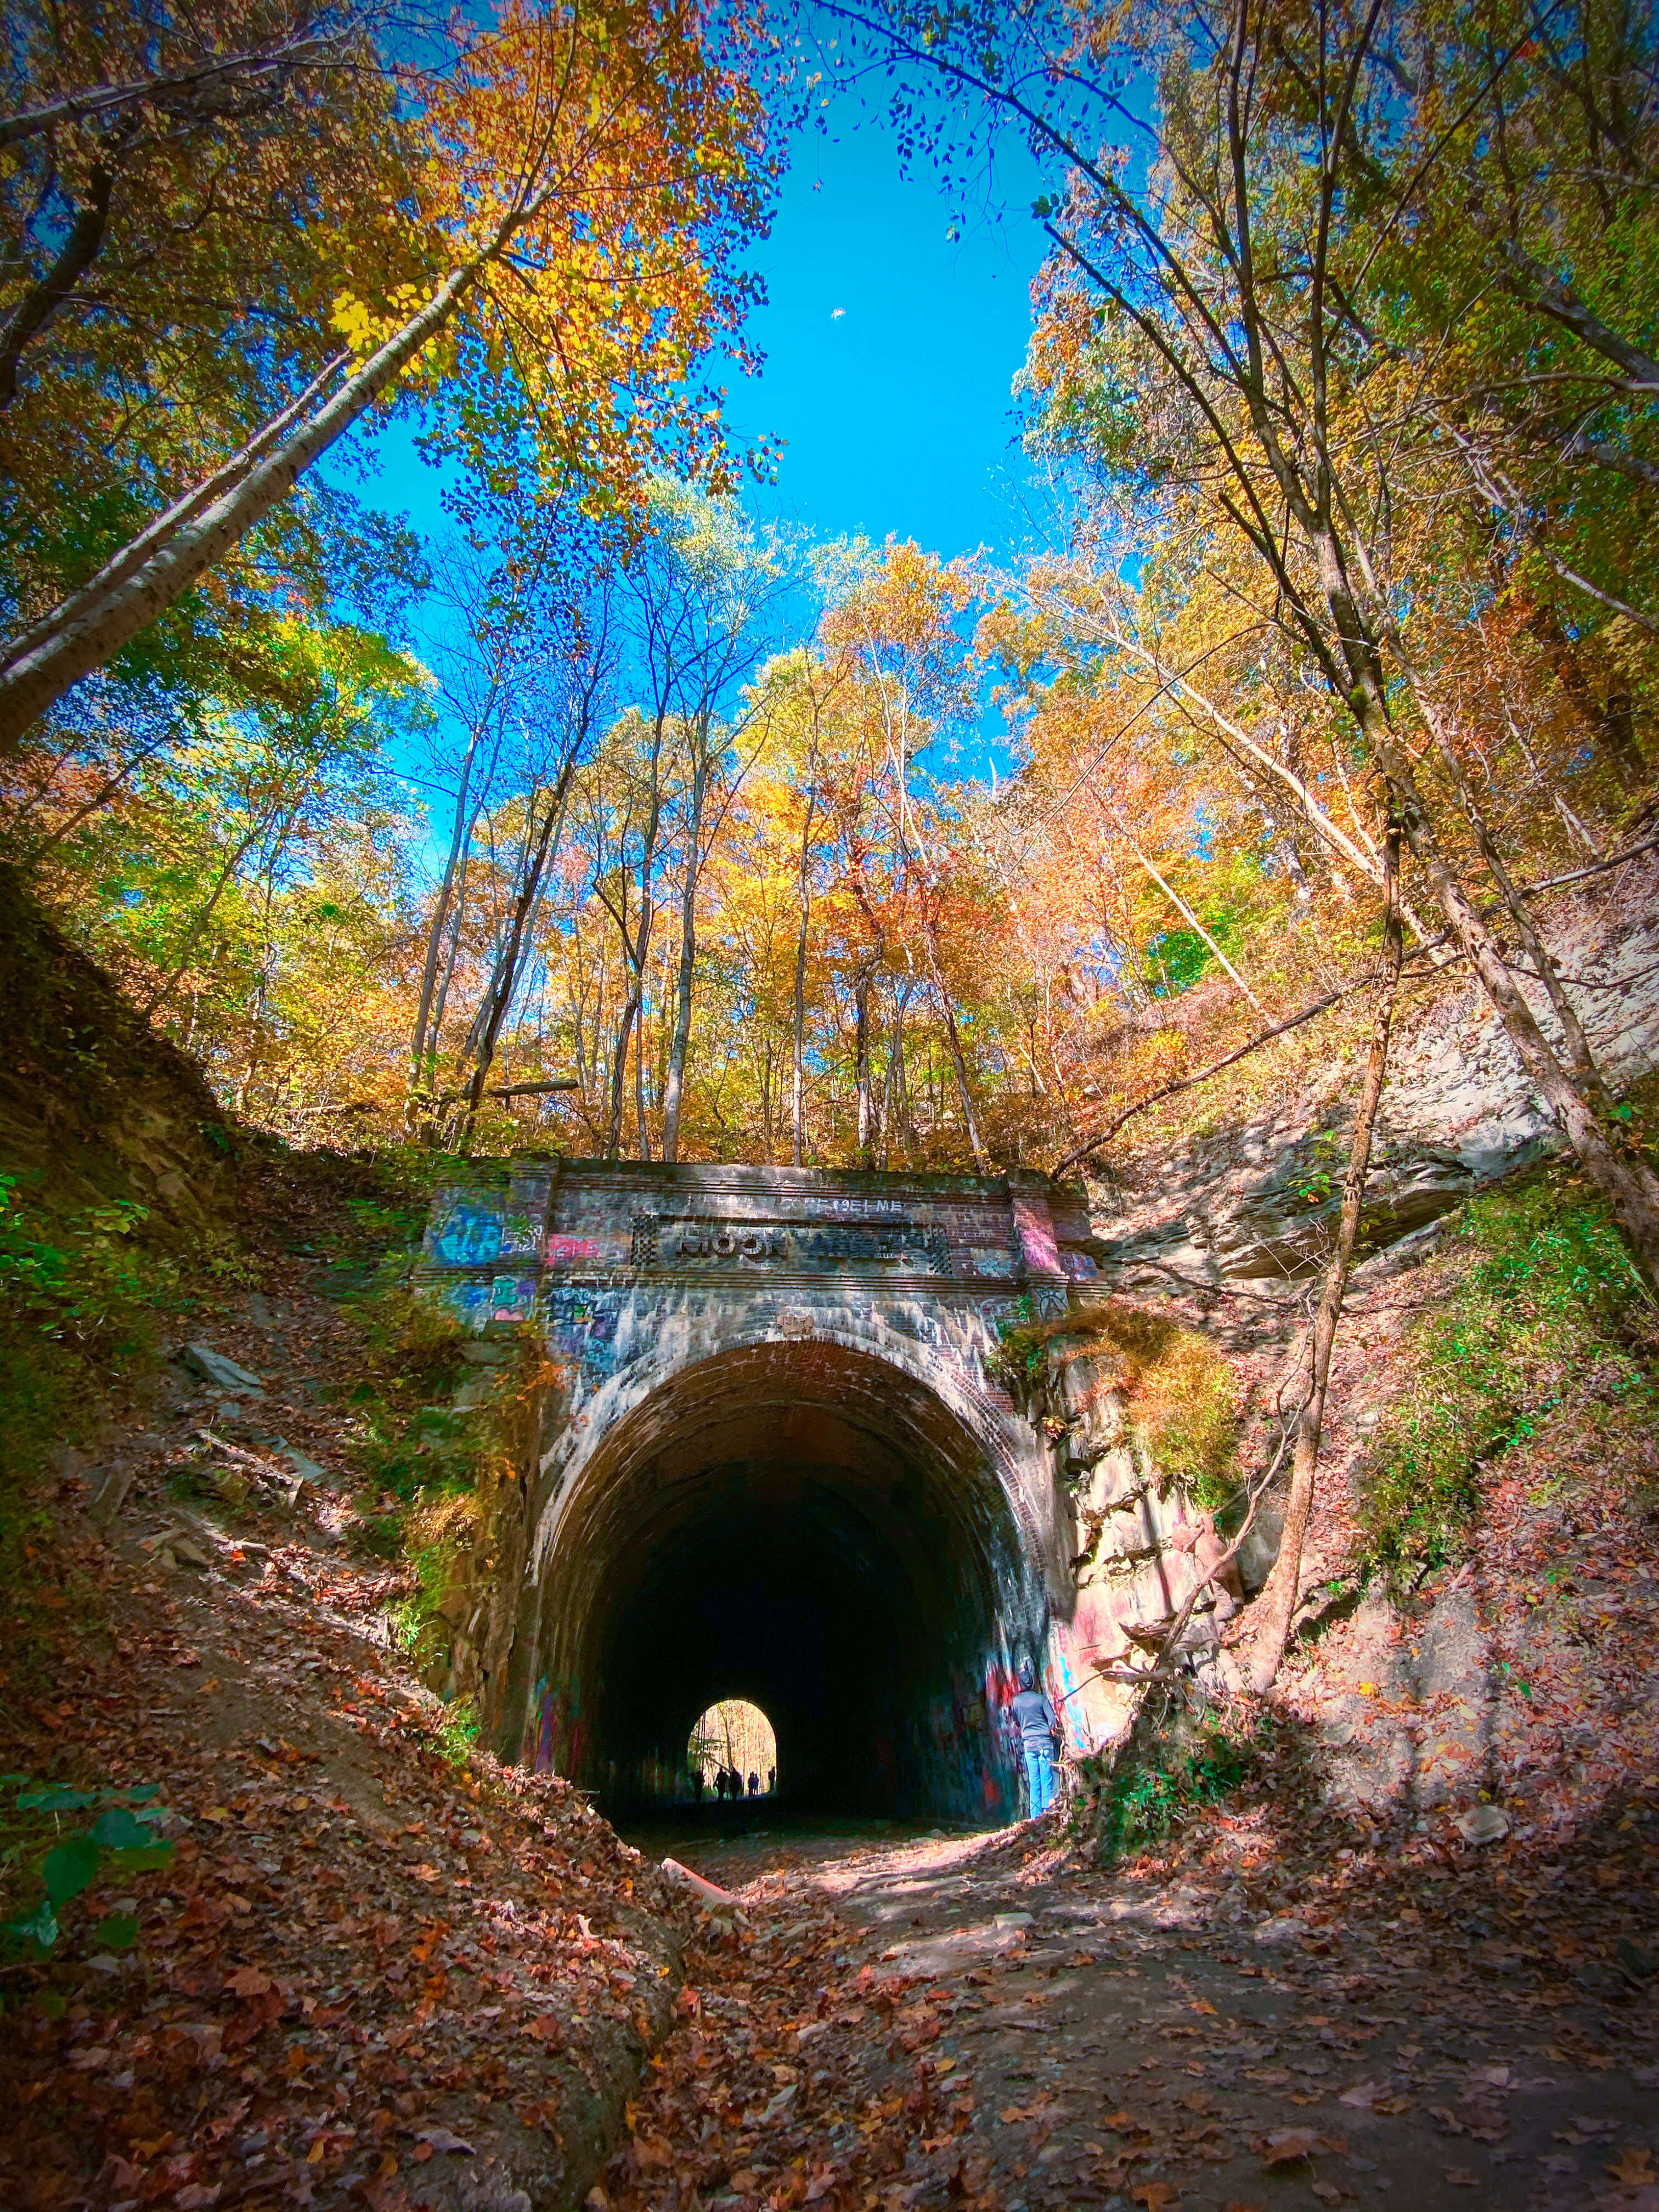 Moonville tunnel opening with brightly colored trees and leaves on the ground.